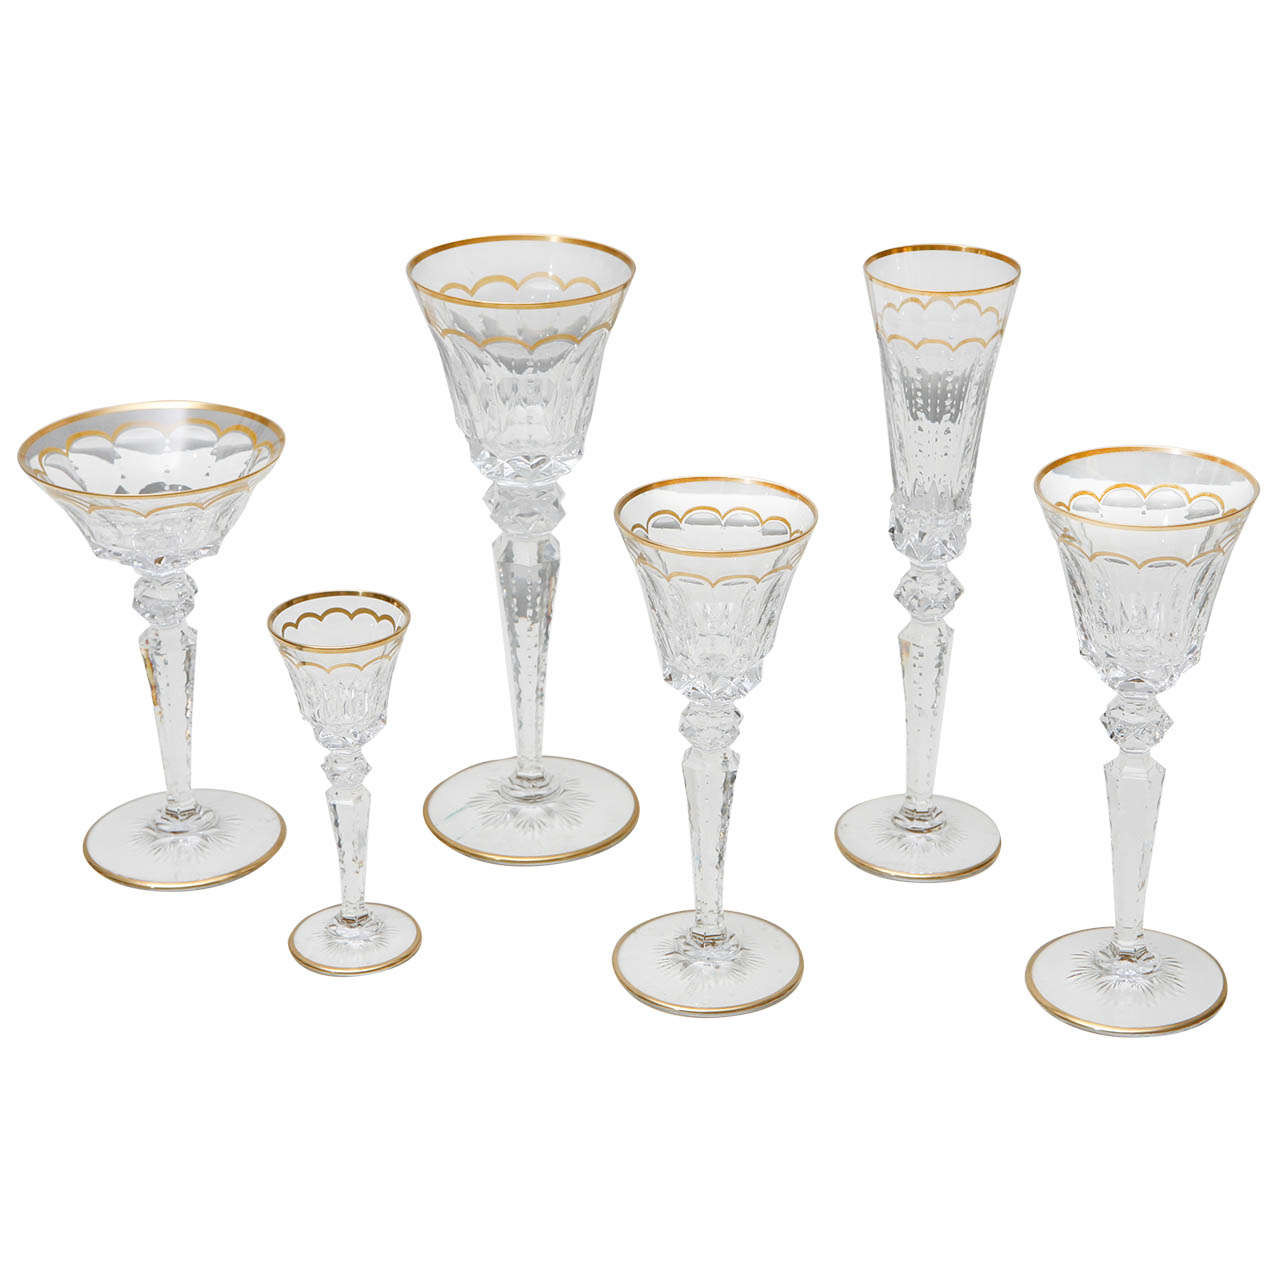 14 Perfect St Louis Crystal France Vase 2024 free download st louis crystal france vase of crystal set of 16 lausitzer stem glasses with colored overlay cut to in saint louis set of 175 cut crystal glasses